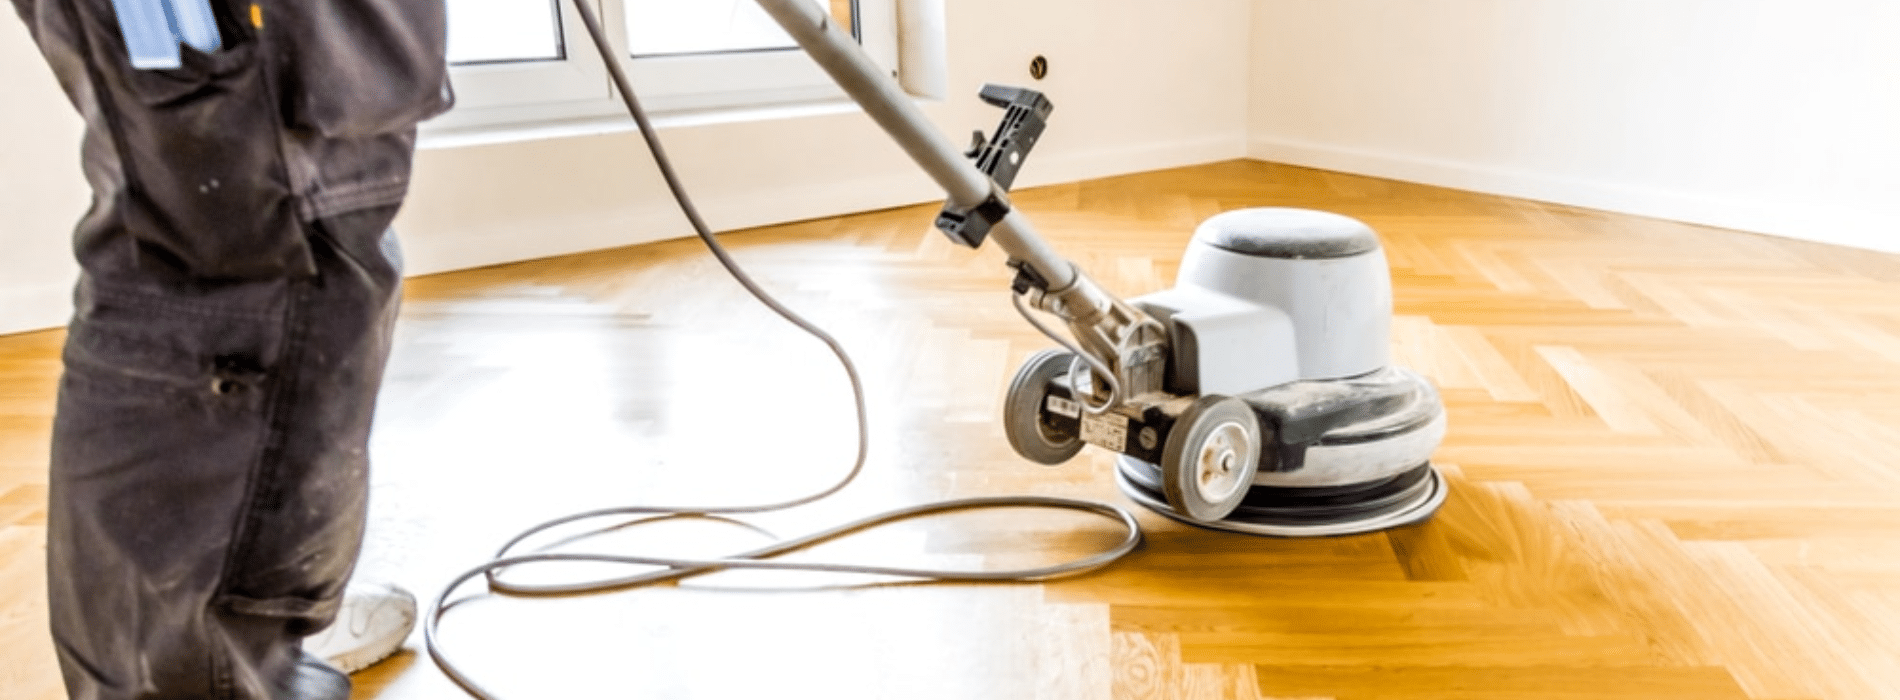 In Hainault, IG7, Professional Mr Sander® skillfully sand a herringbone floor using the powerful 450x850 mm Bona buffer sander. The 230V, 50/60 Hz equipment delivers an impressive 2300 effect, guaranteeing a clean and efficient result